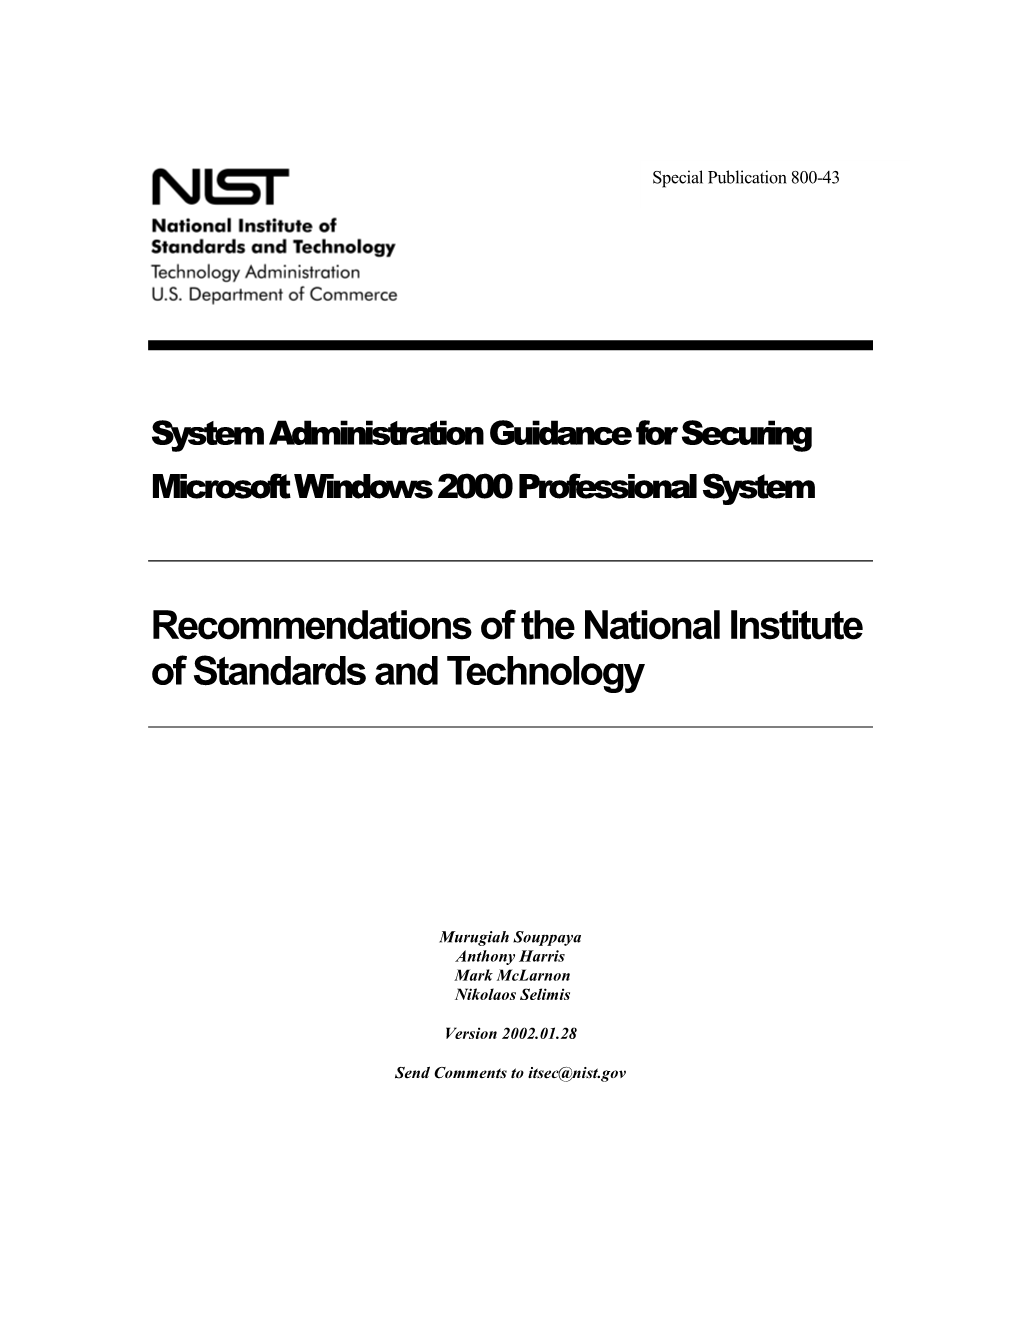 Security Administration Guidance for Windows 2000 Professional